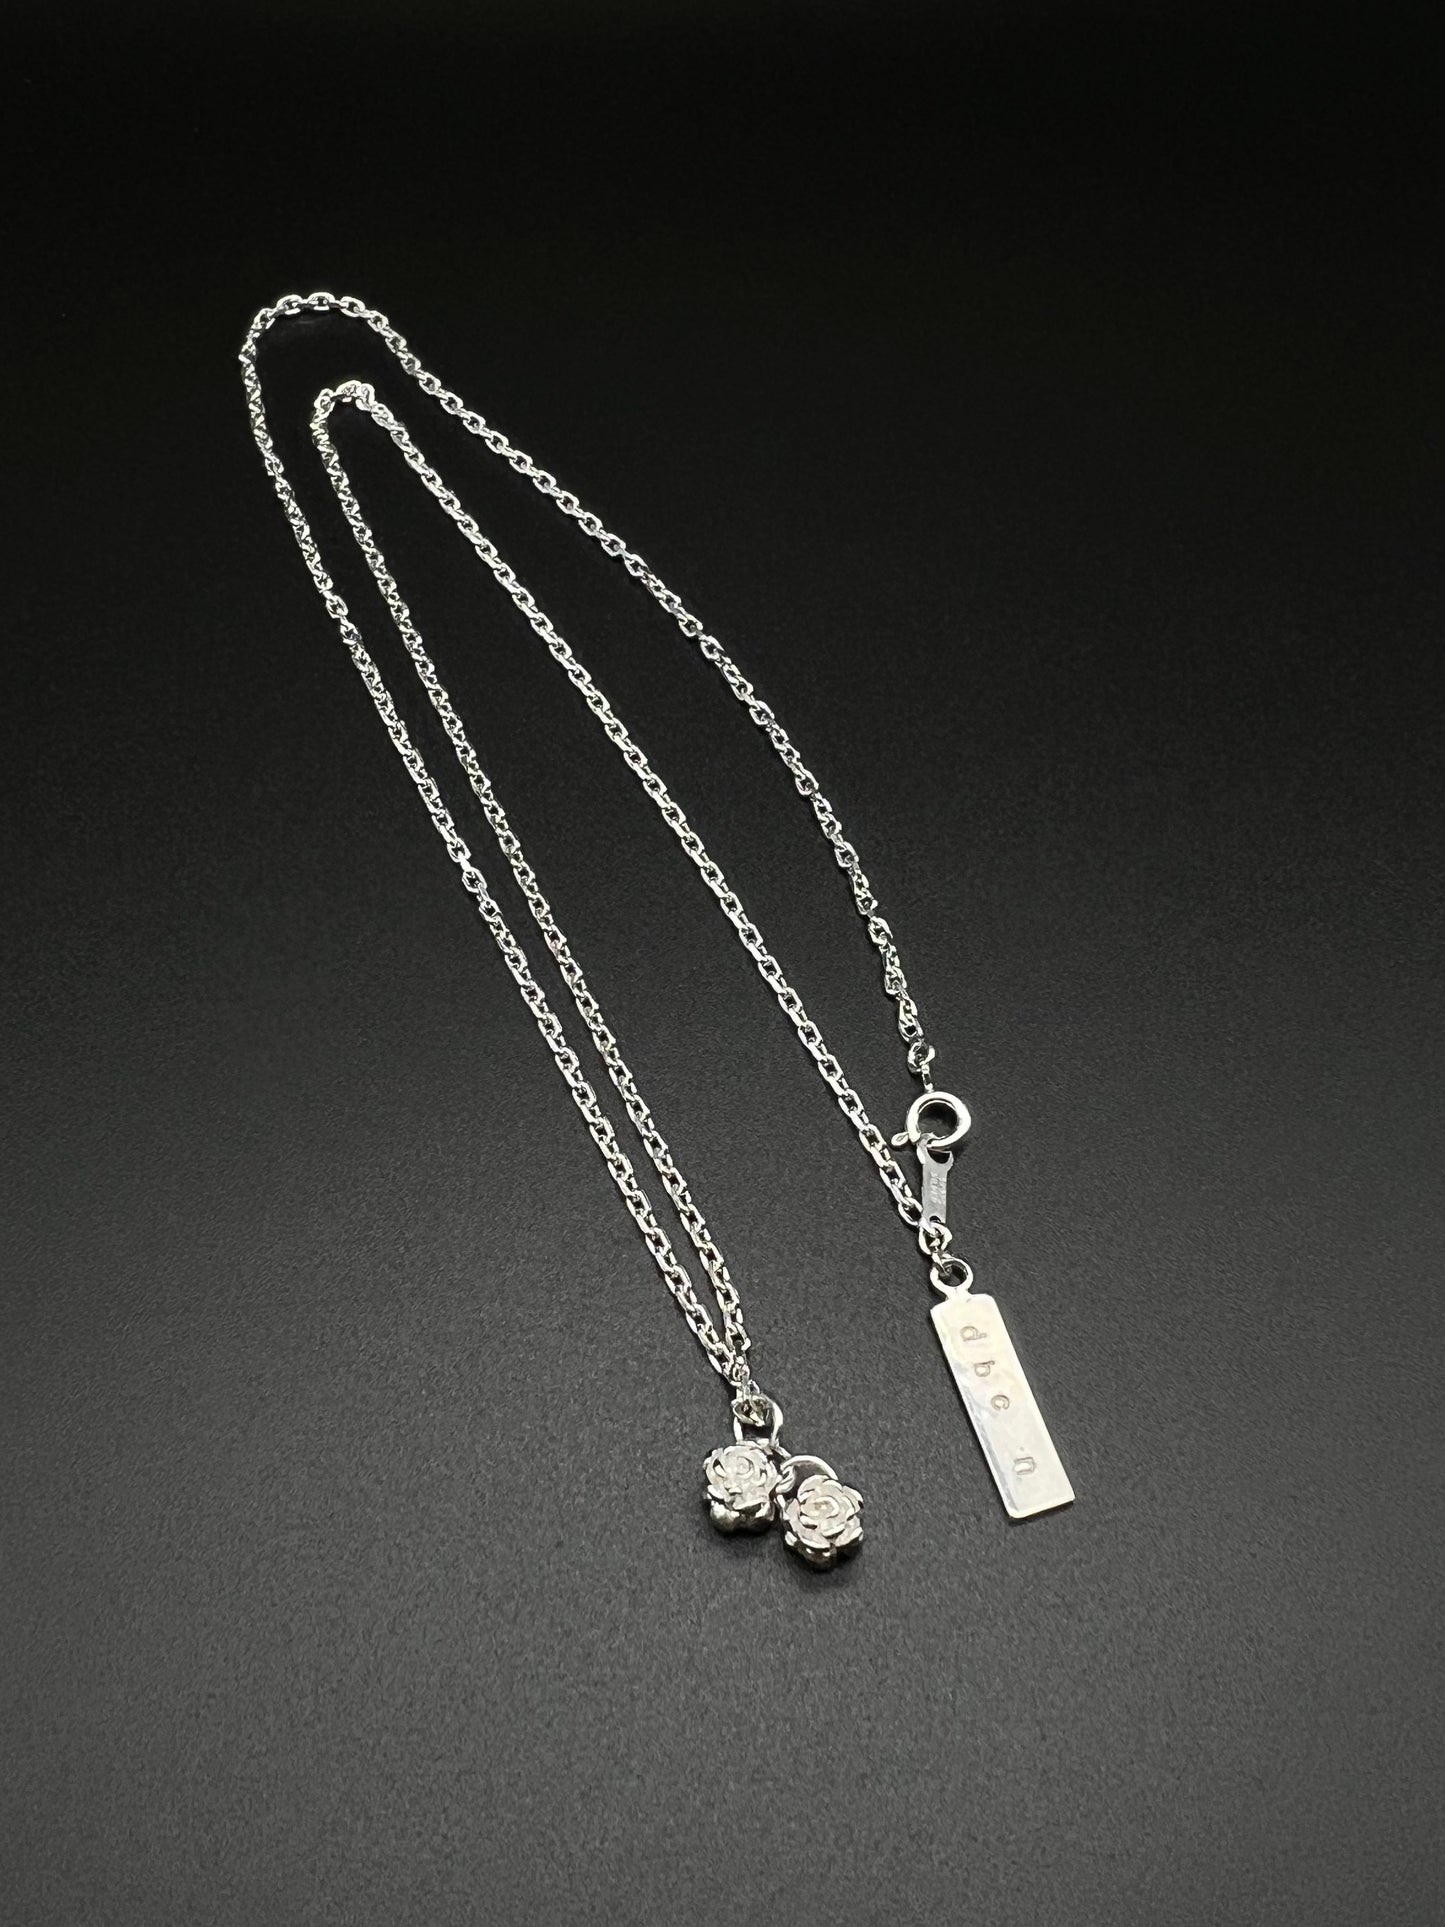 2Rose necklace -silver925